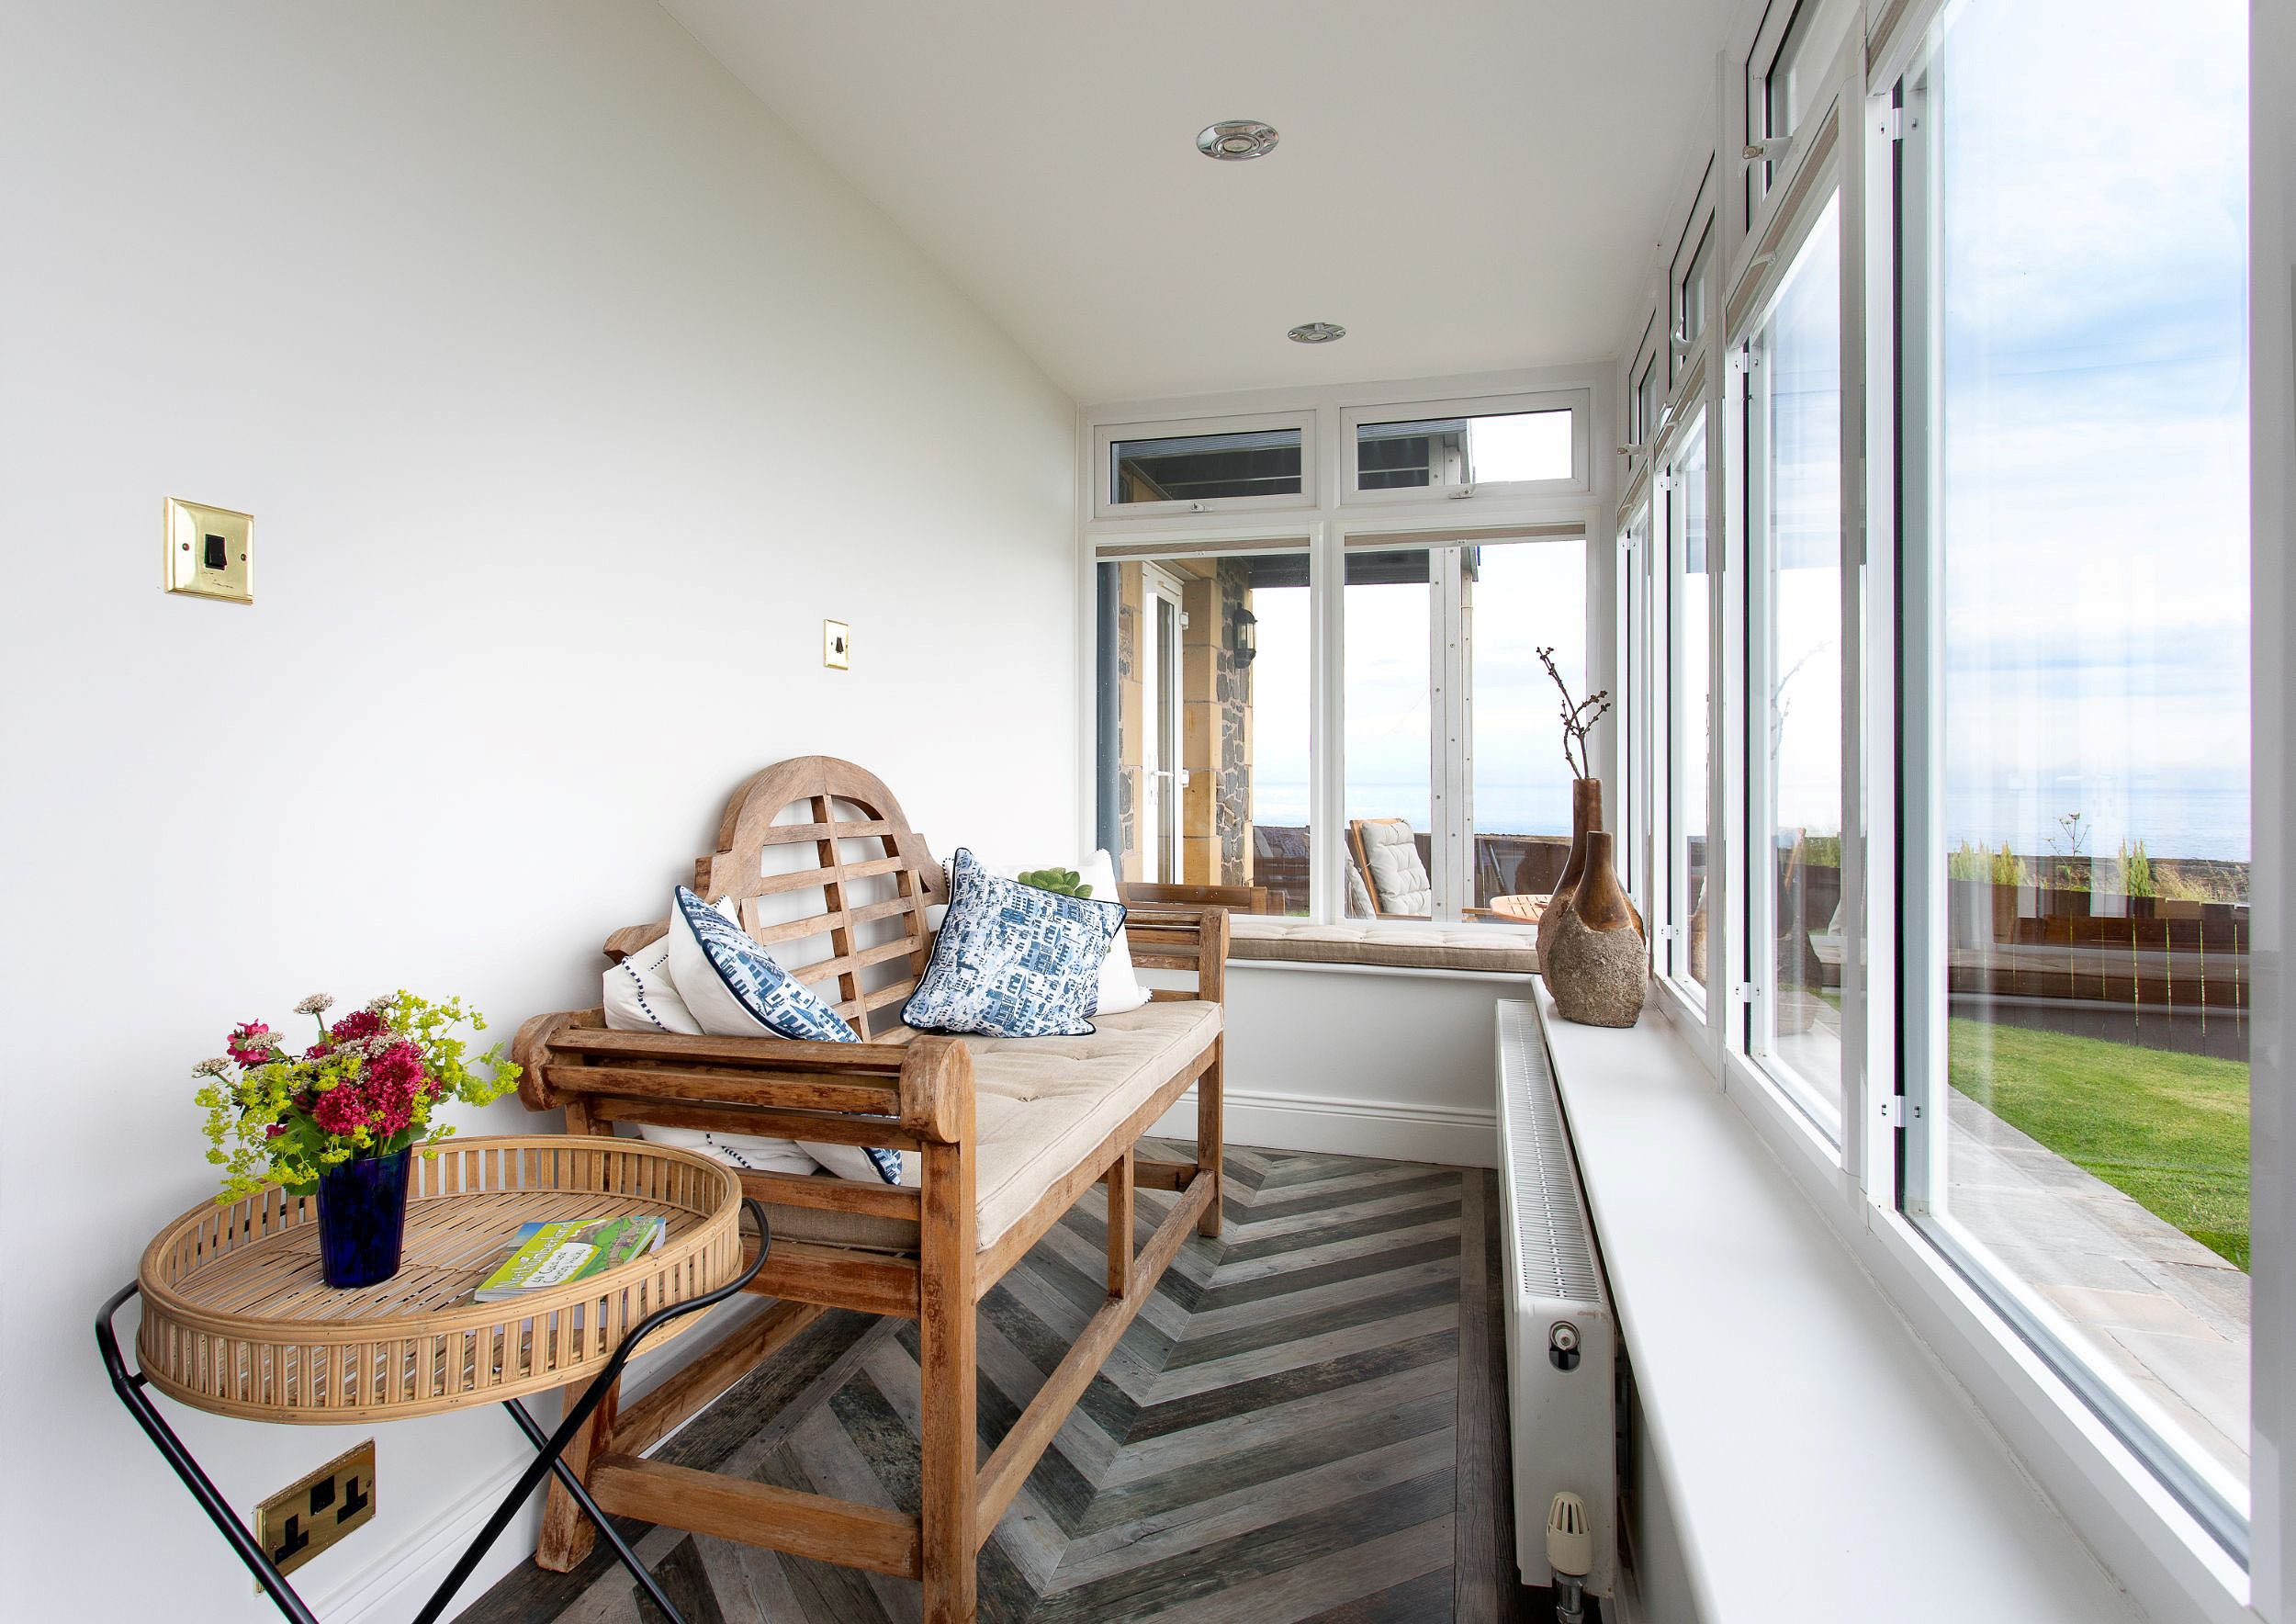 Sea Breeze - bench seating in the sun room where you can enjoy coastal views